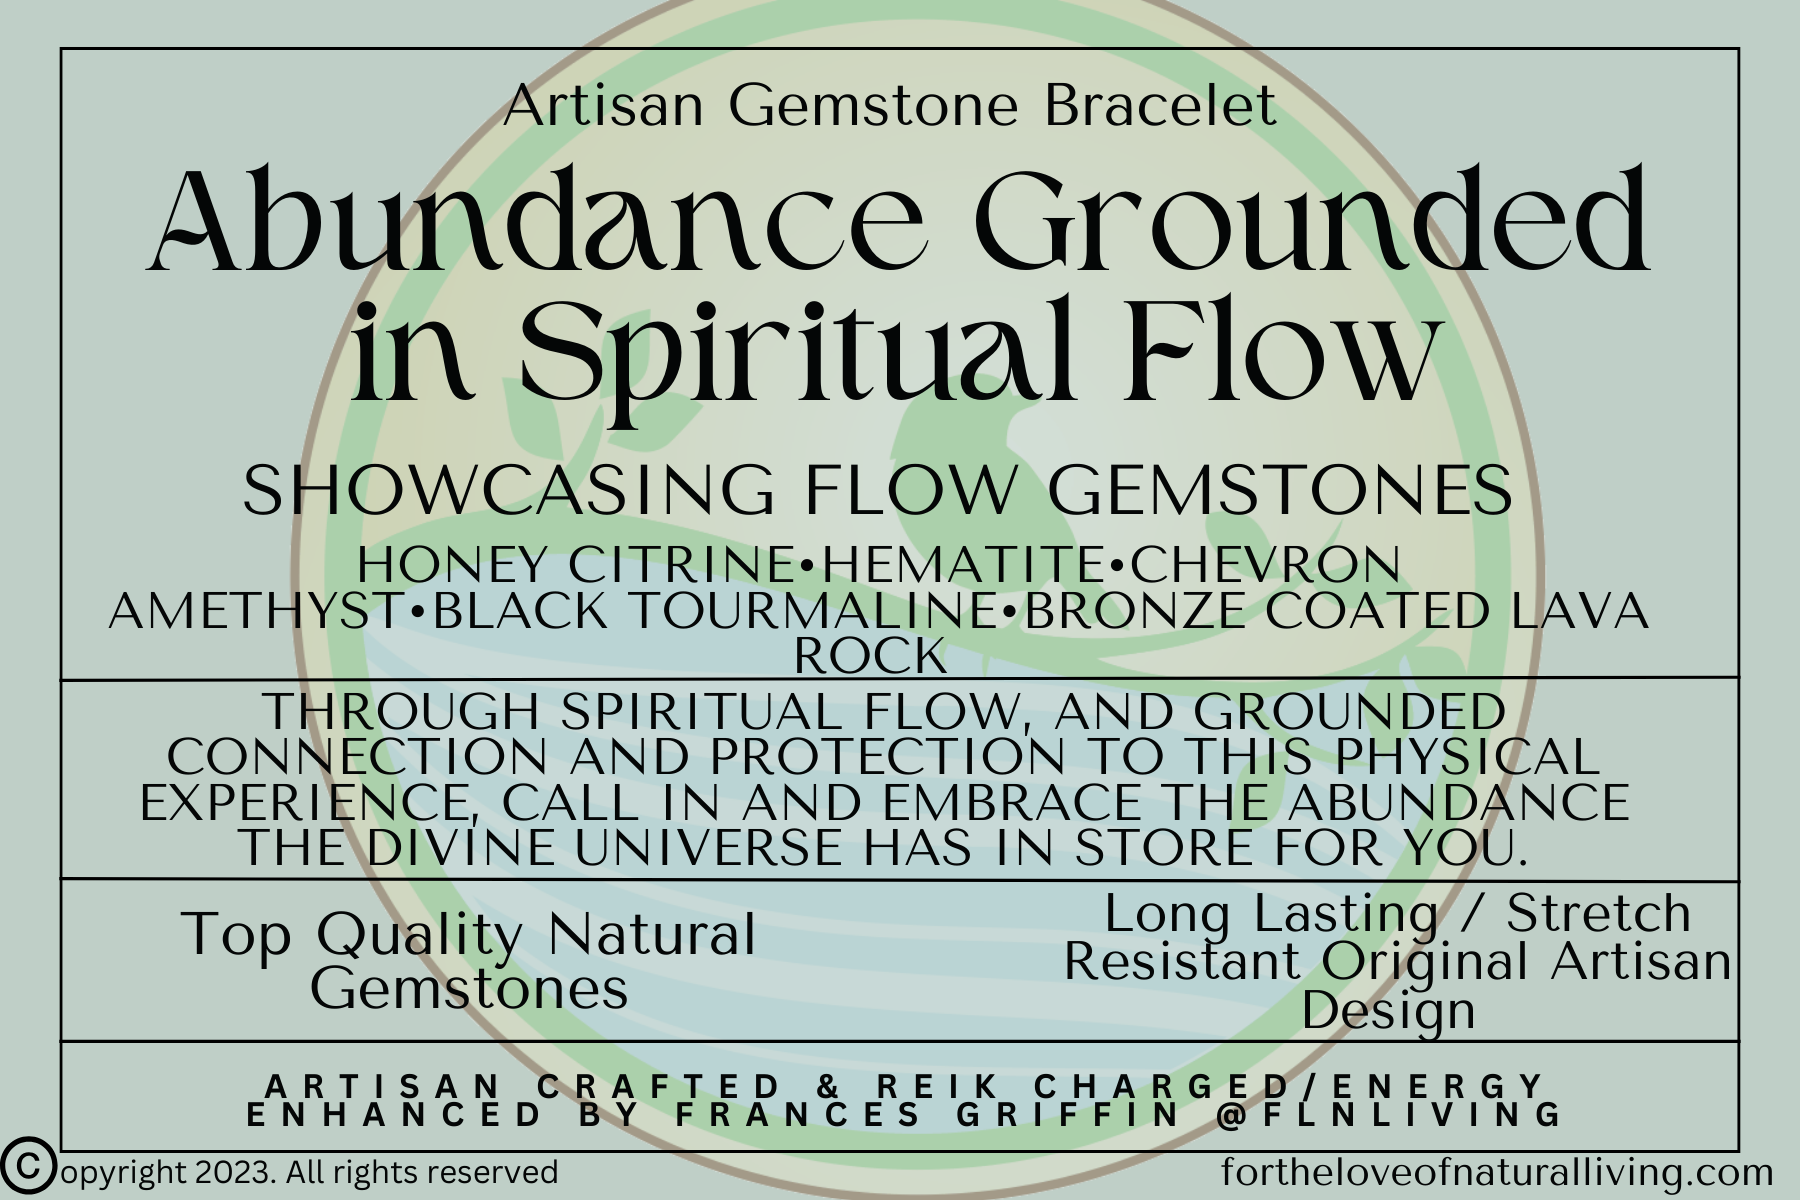 Abundance Grounded in Spiritual Flow - For the Love of Natural Living, LLC 